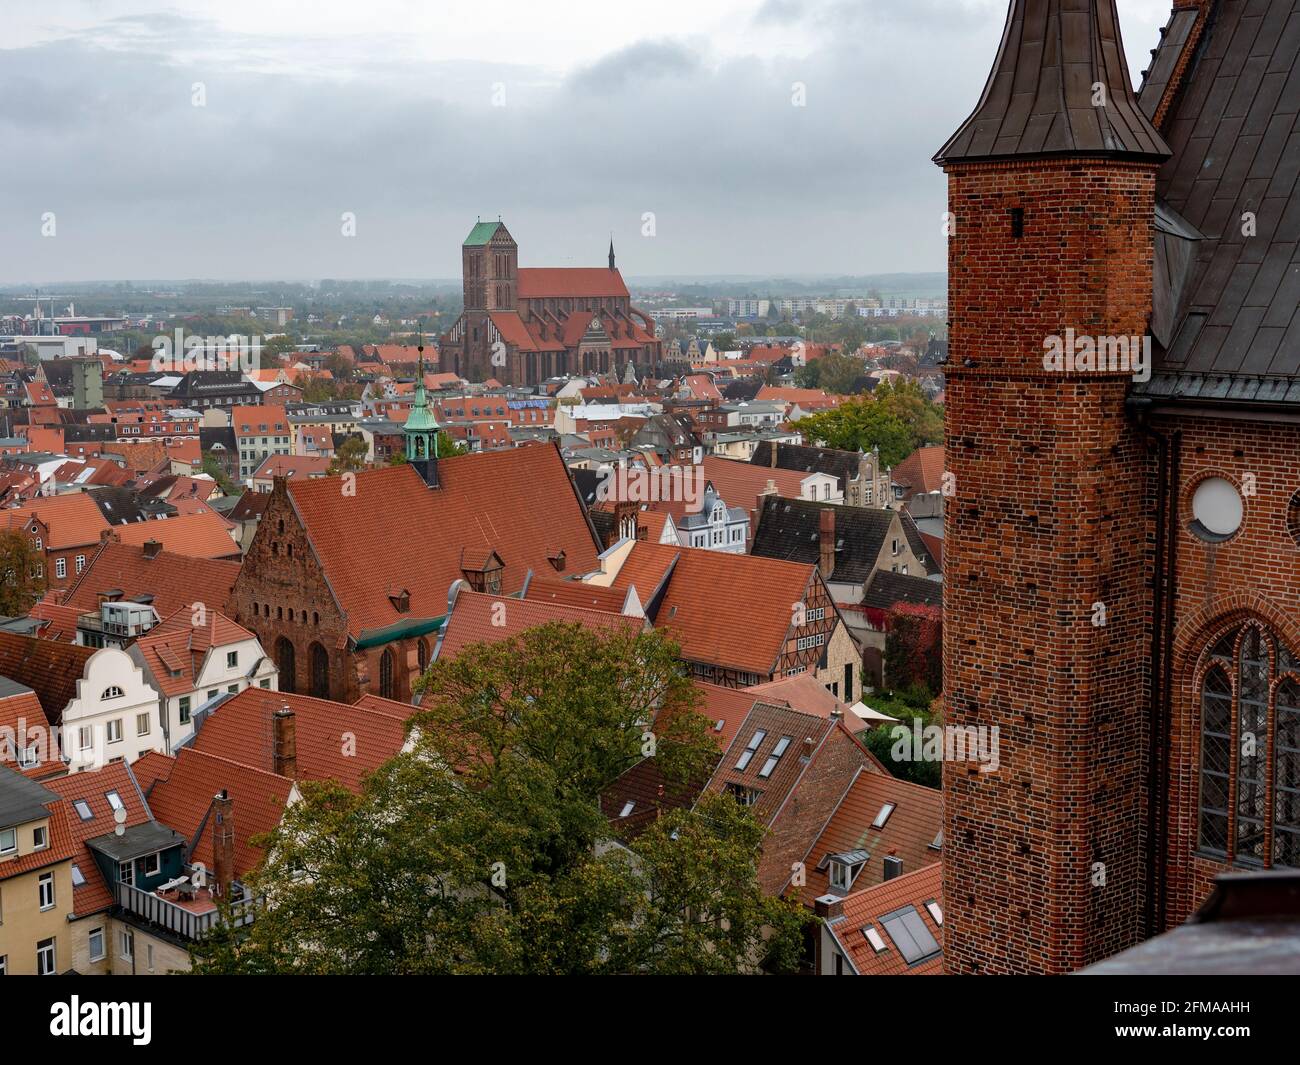 View over old town of Wismar with Church of the Holy Spirit and St. Nikolai Church, Wismar, UNESCO World Heritage, Mecklenburg-Western Pomerania, Germany Stock Photo